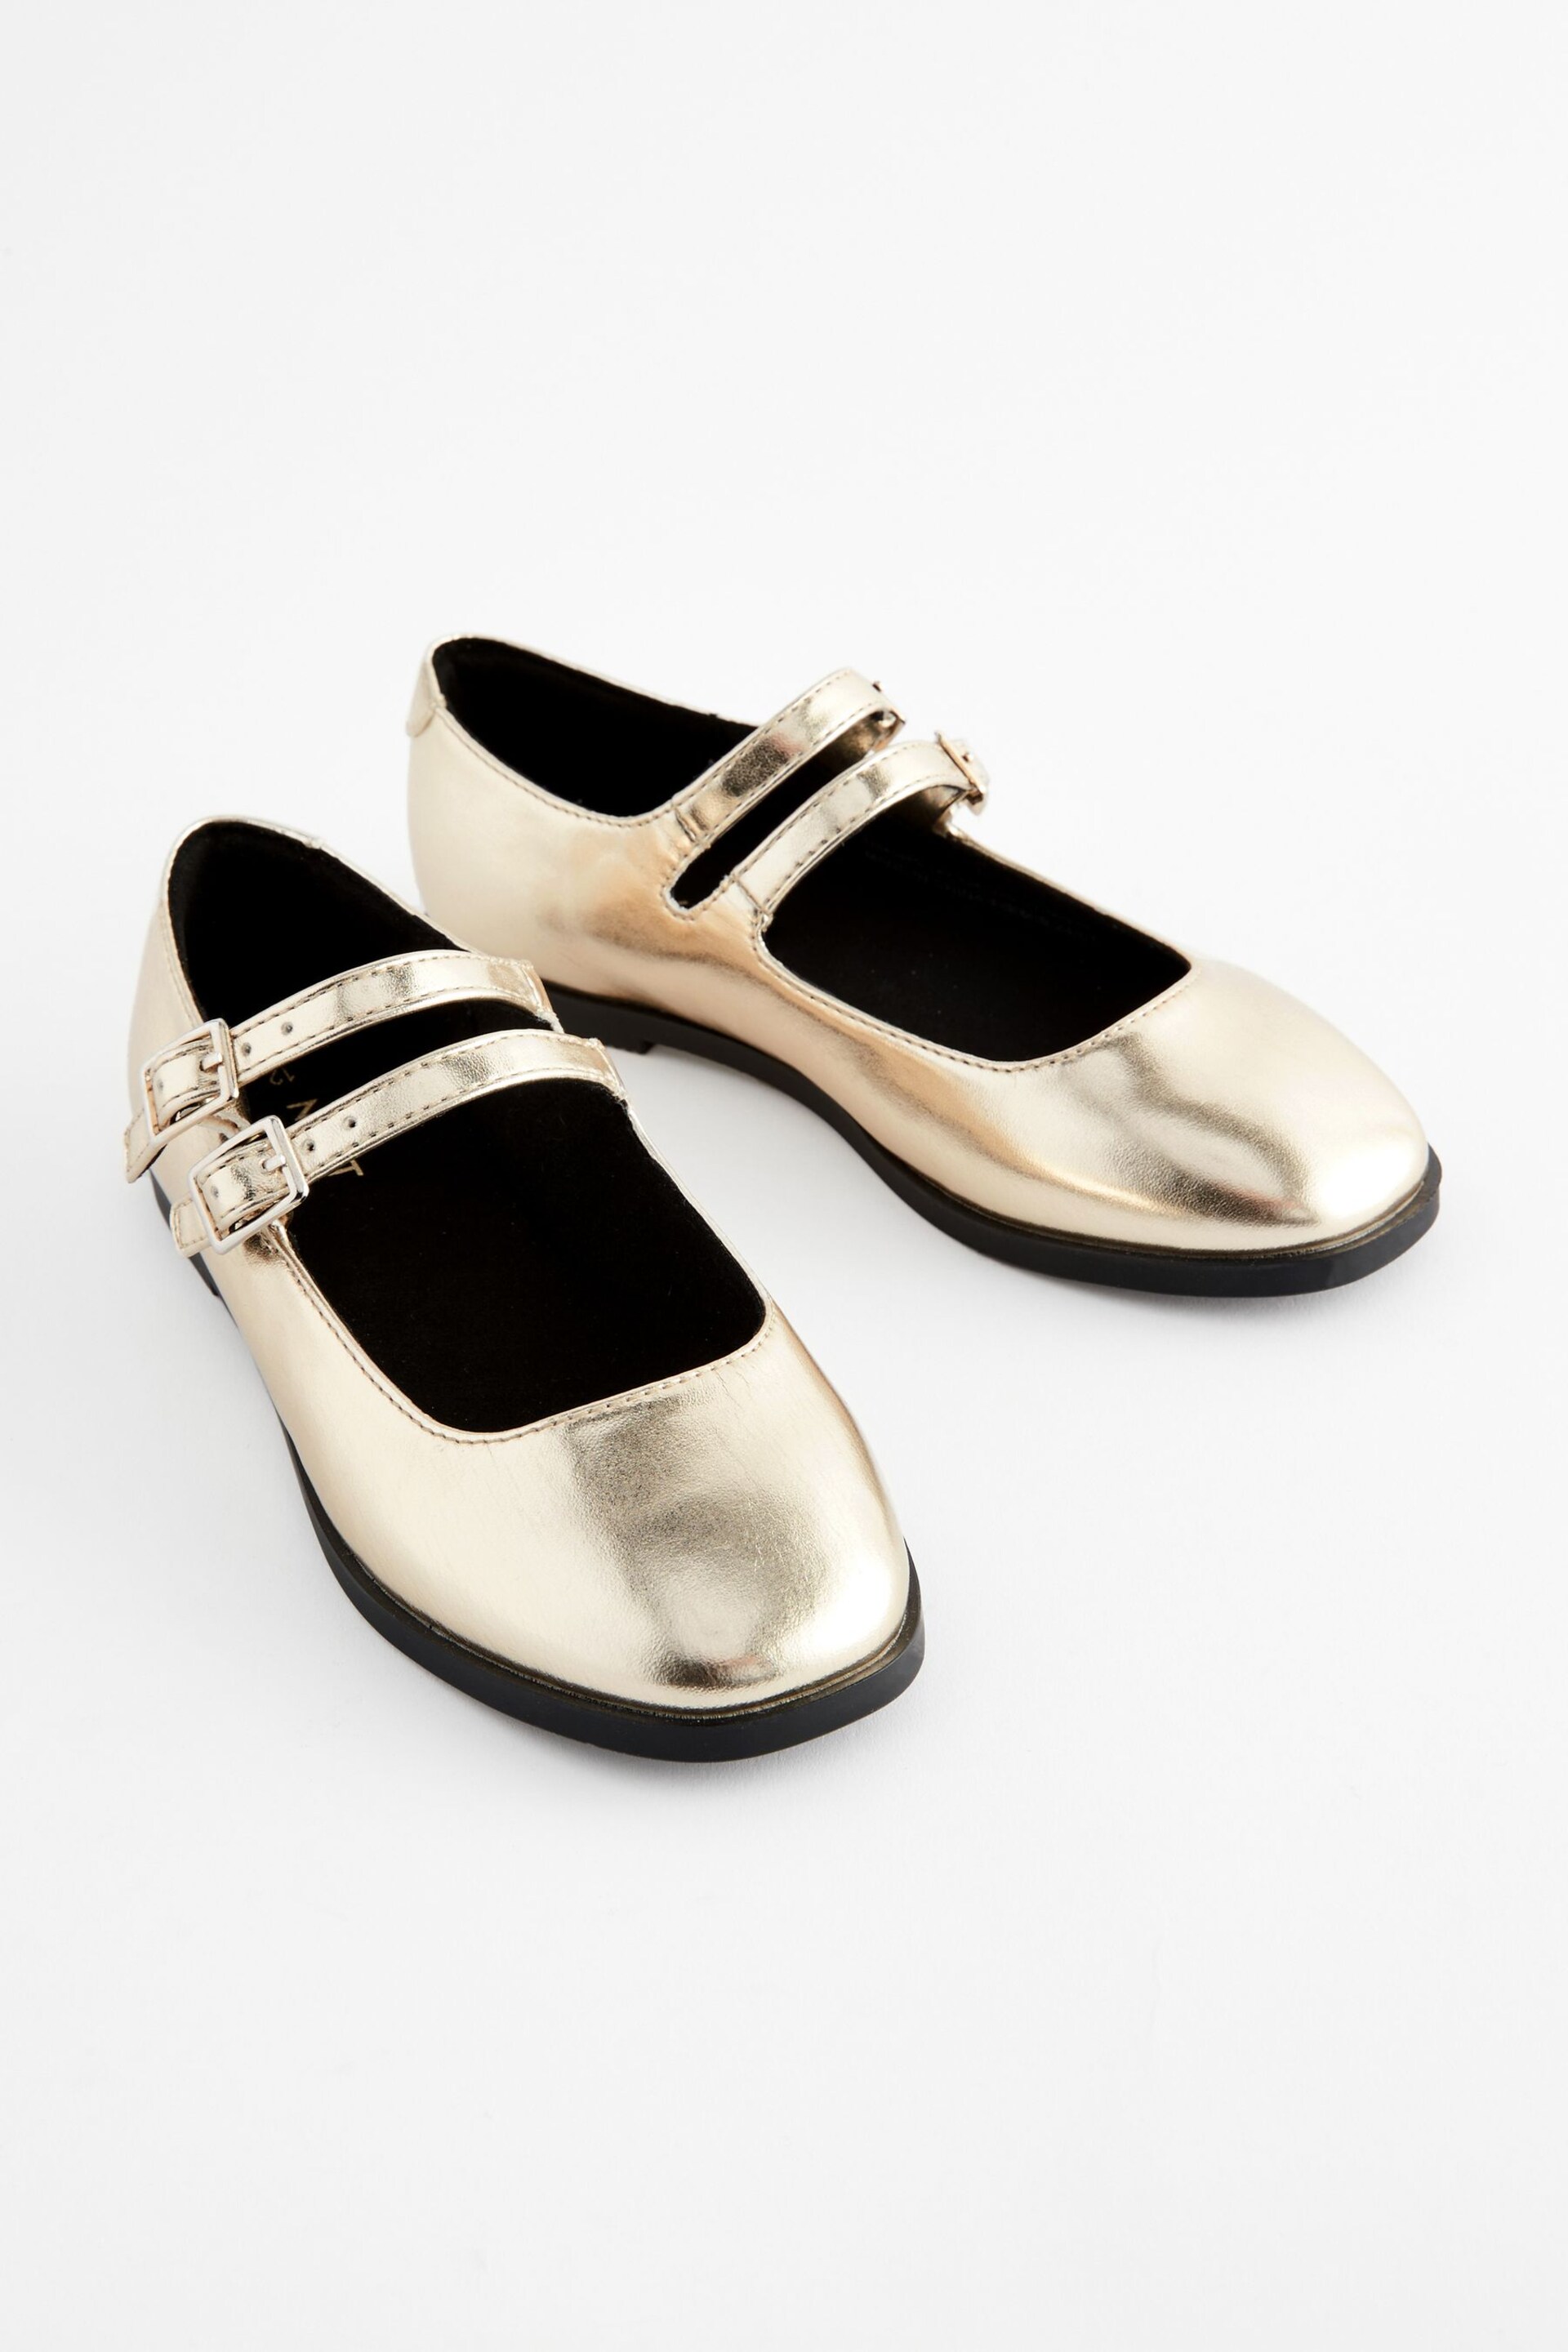 Gold Metallic Double Strap Mary Jane Shoes - Image 3 of 6